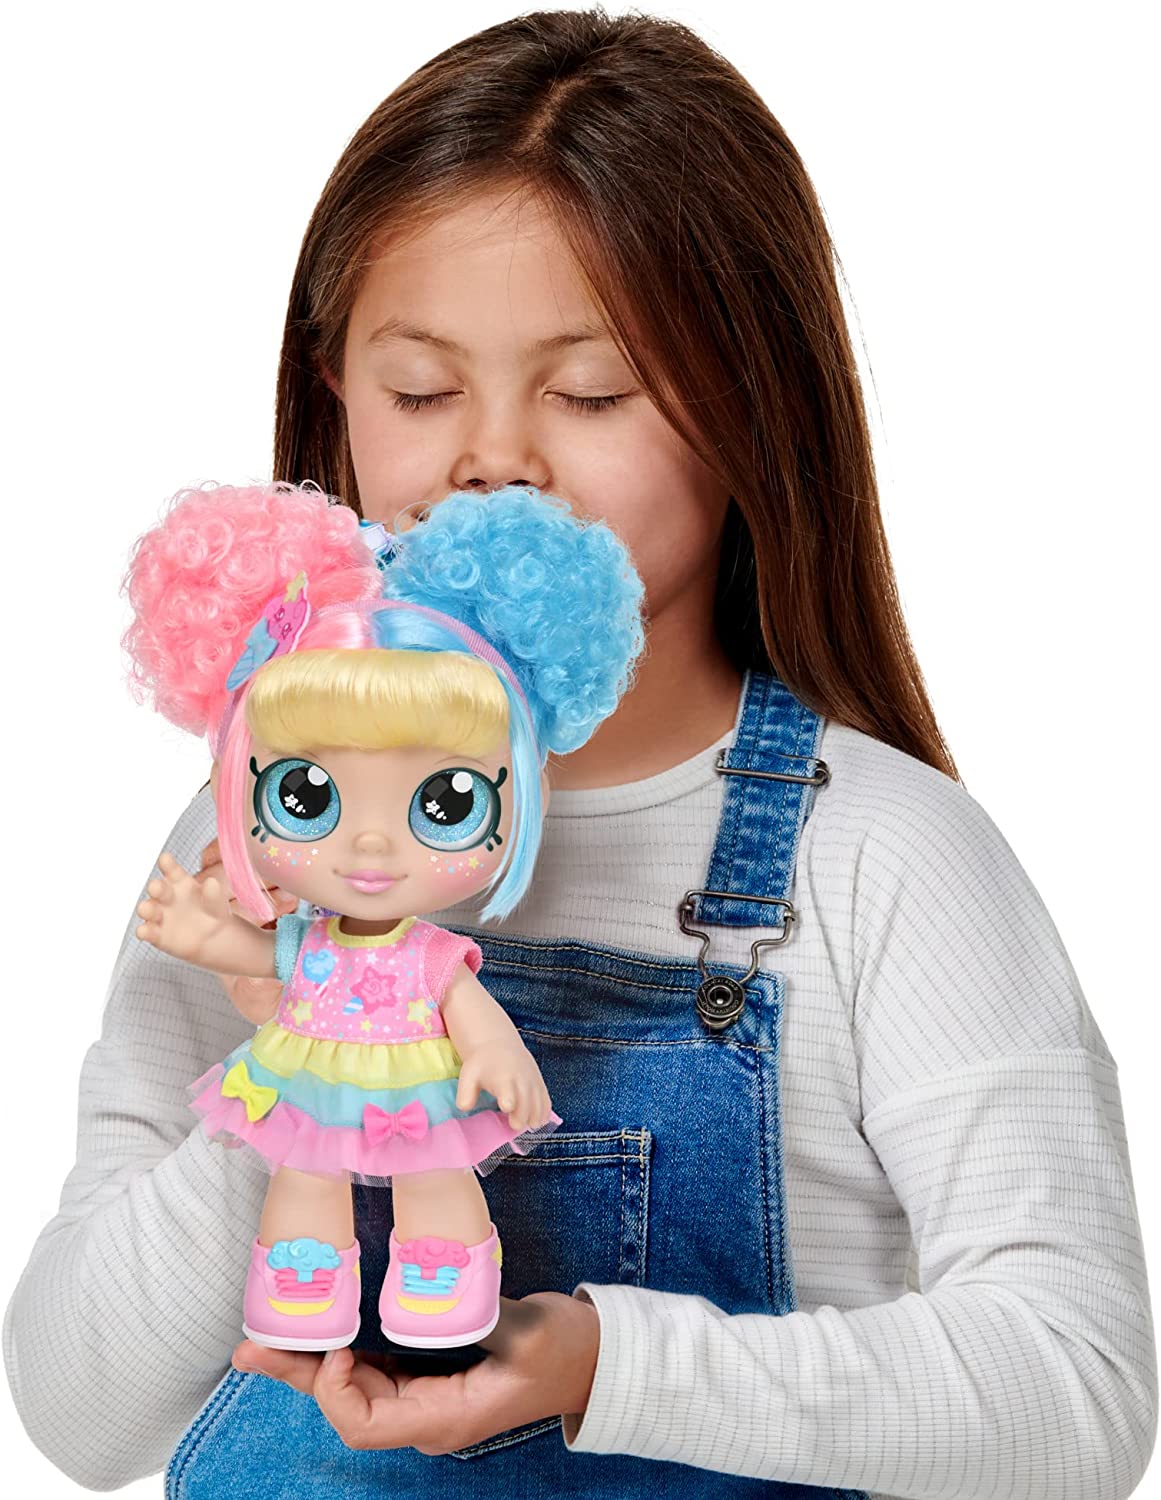 Kindi Kids Scented Toddler Doll - Candy Sweets